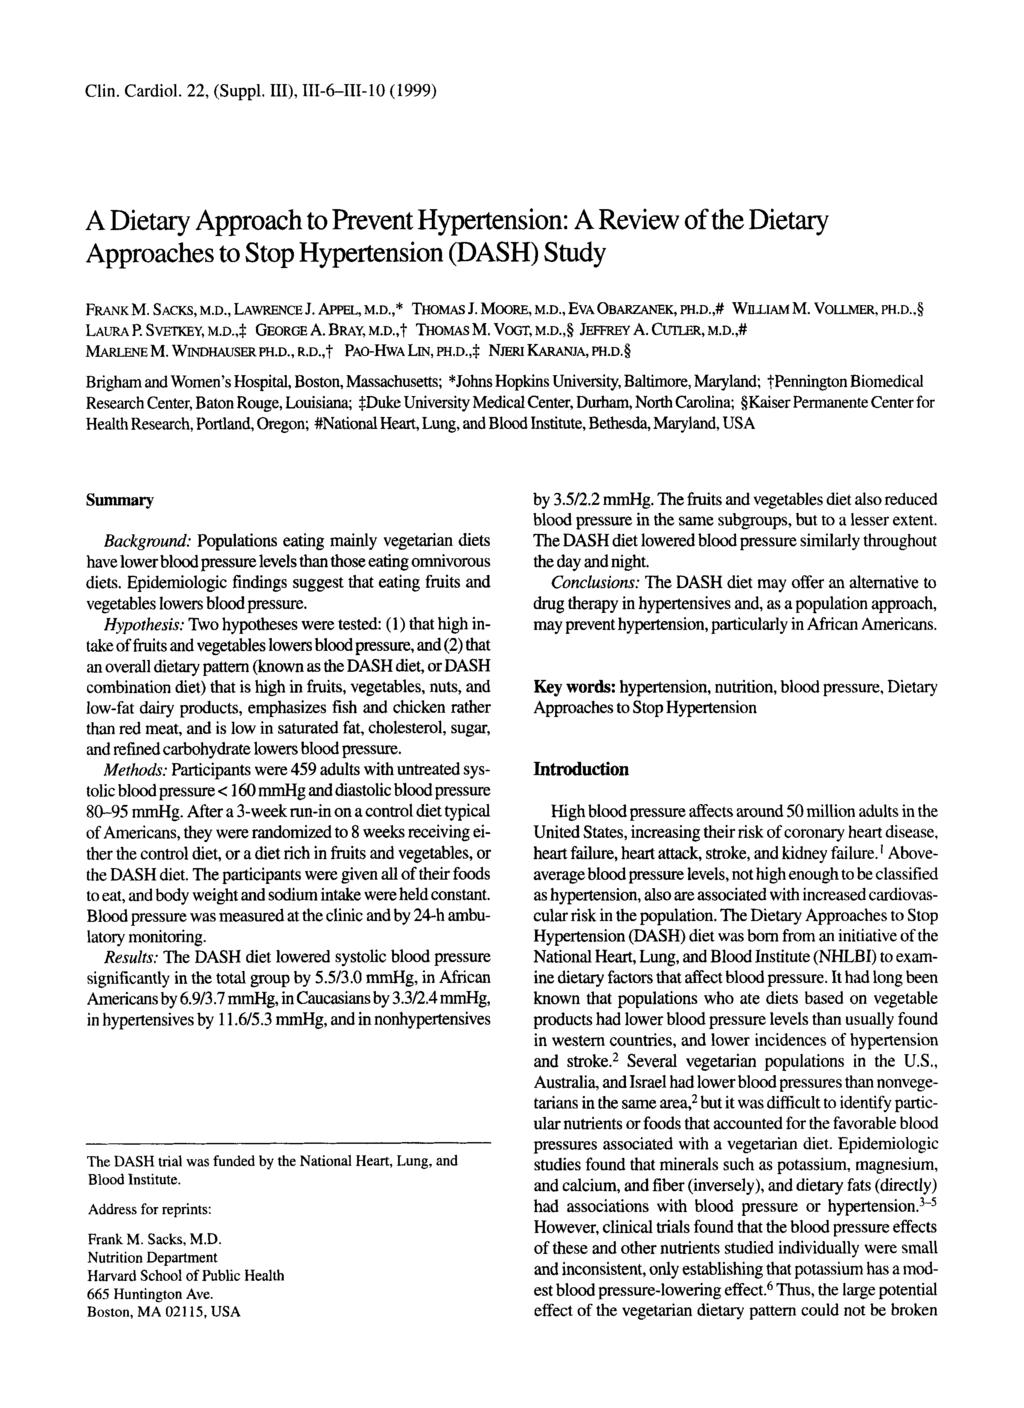 Clin. Cardiol. 22, (Suppl. 111), 111611110 (1999) A Dietary Approach to Prevent Hypertension: A Review of the Dietary Approaches to Stop Hypertension (DASH) Study FRANKM. SACKS, M.D., LAWRENCE J.